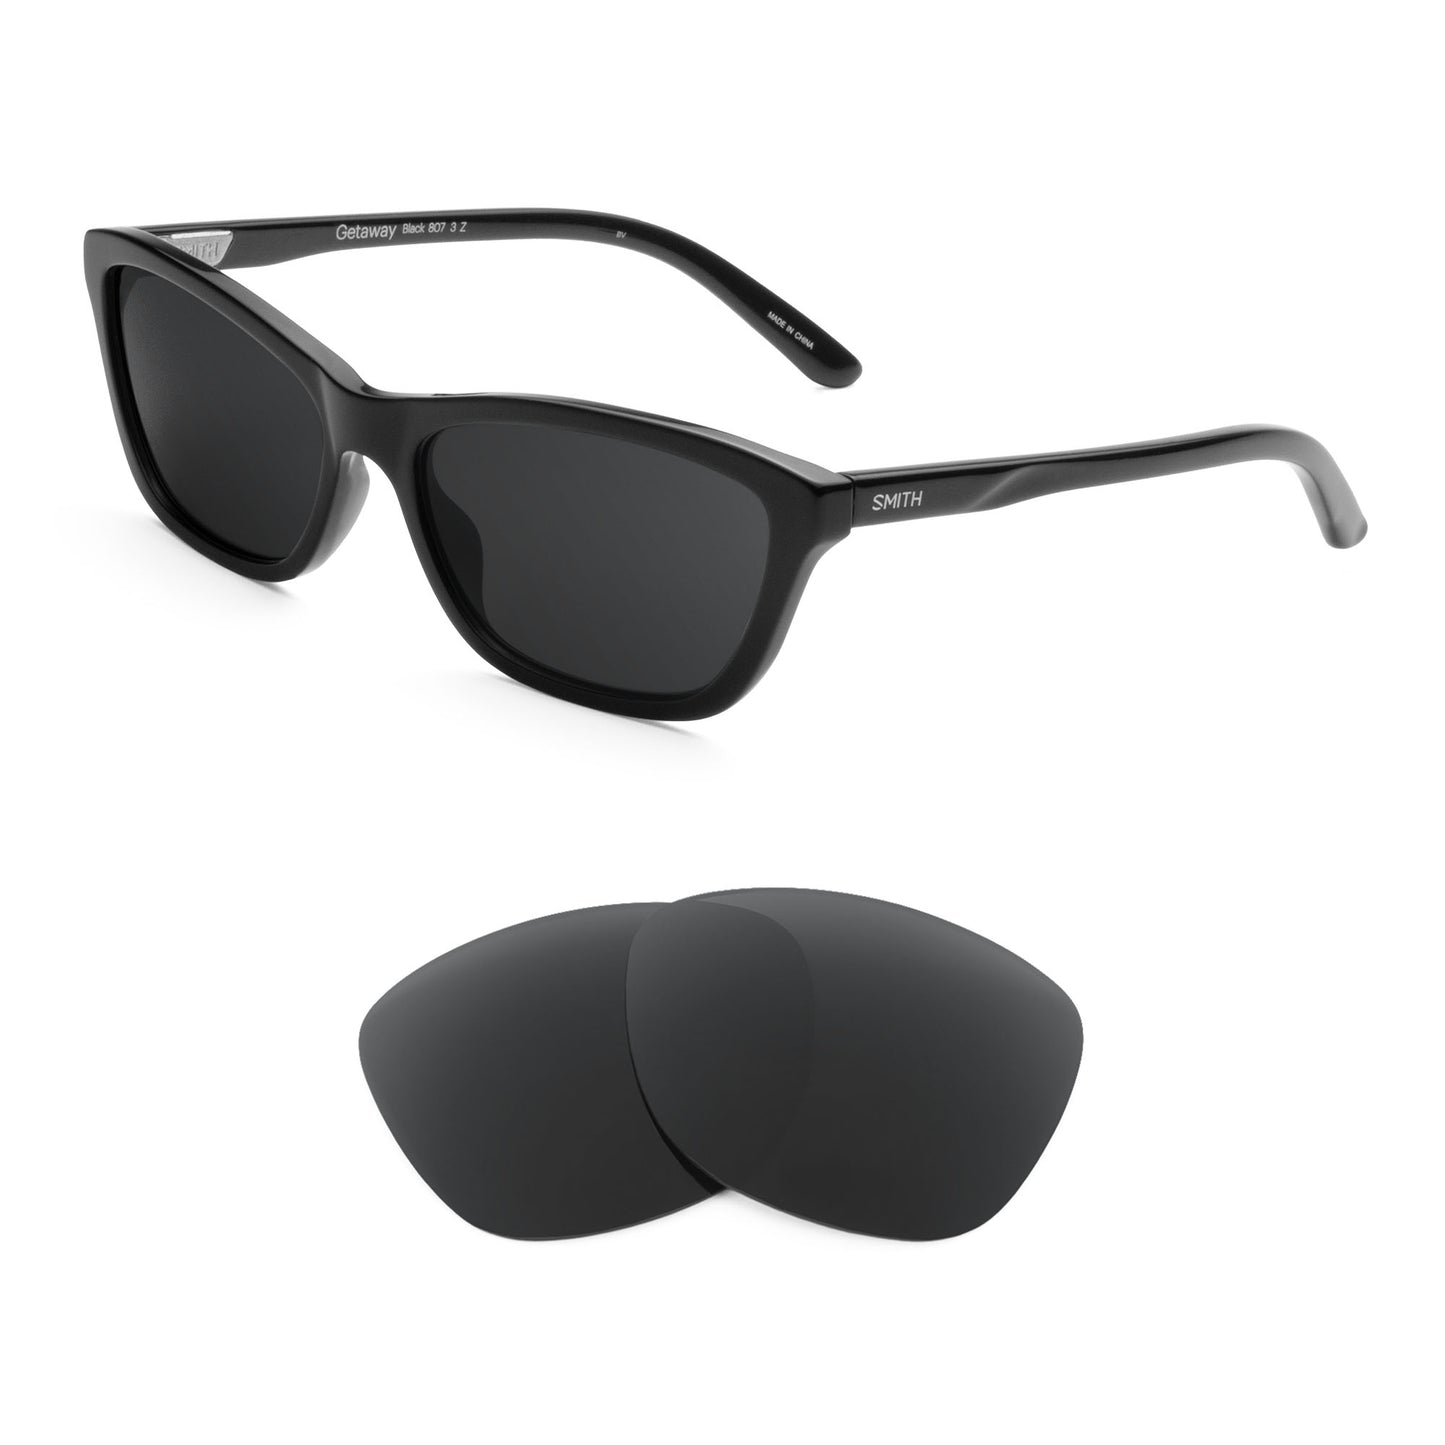 Smith Getaway sunglasses with replacement lenses